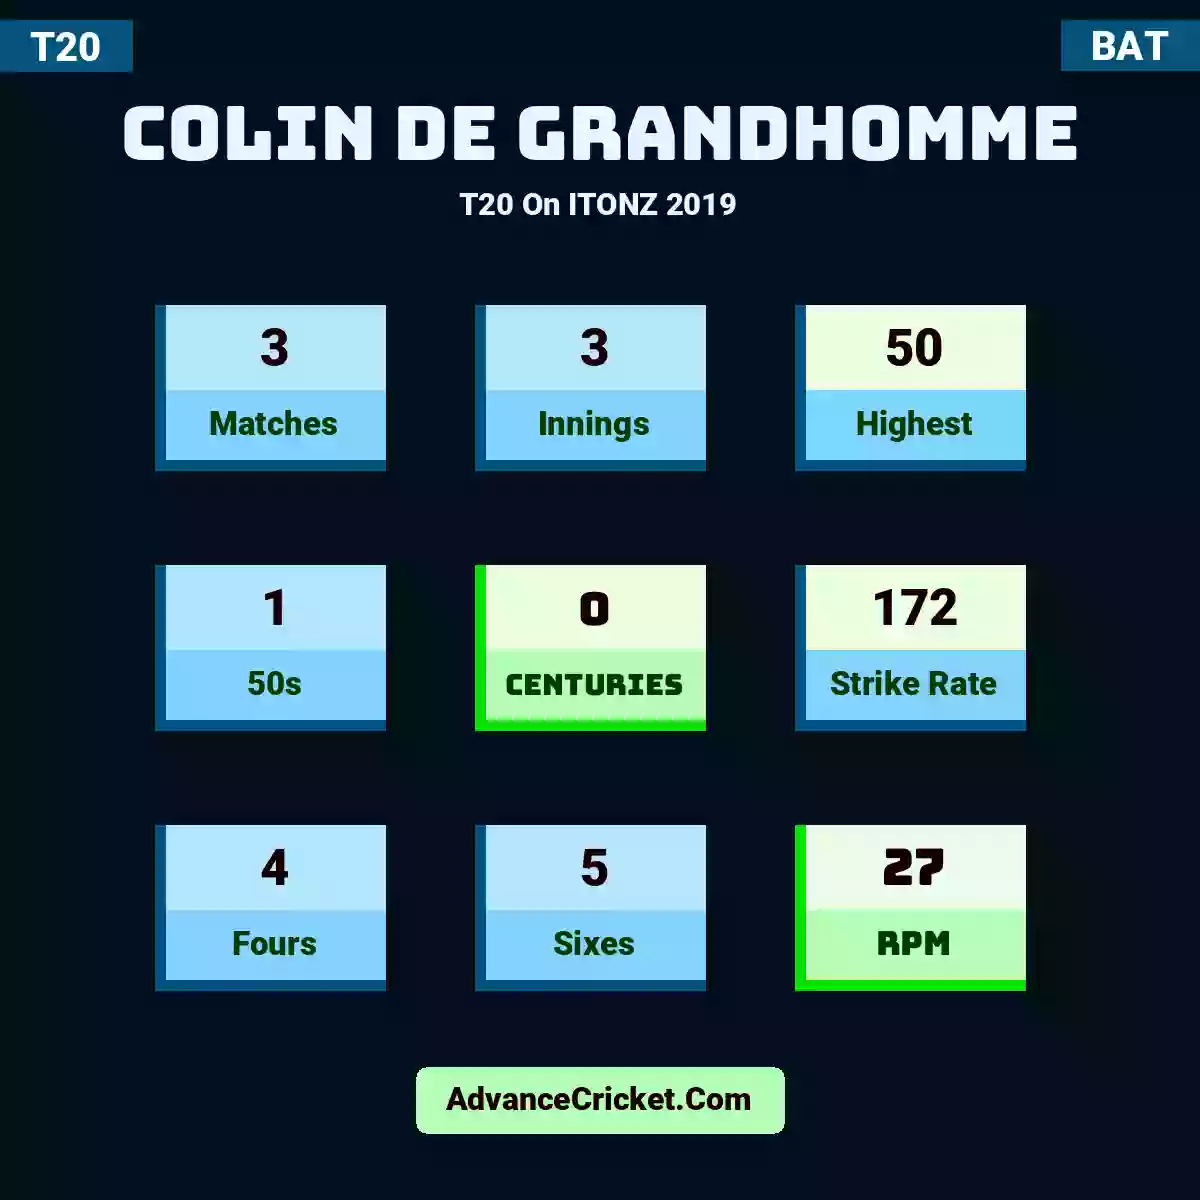 Colin de Grandhomme T20  On ITONZ 2019, Colin de Grandhomme played 3 matches, scored 50 runs as highest, 1 half-centuries, and 0 centuries, with a strike rate of 172. C.Grandhomme hit 4 fours and 5 sixes, with an RPM of 27.